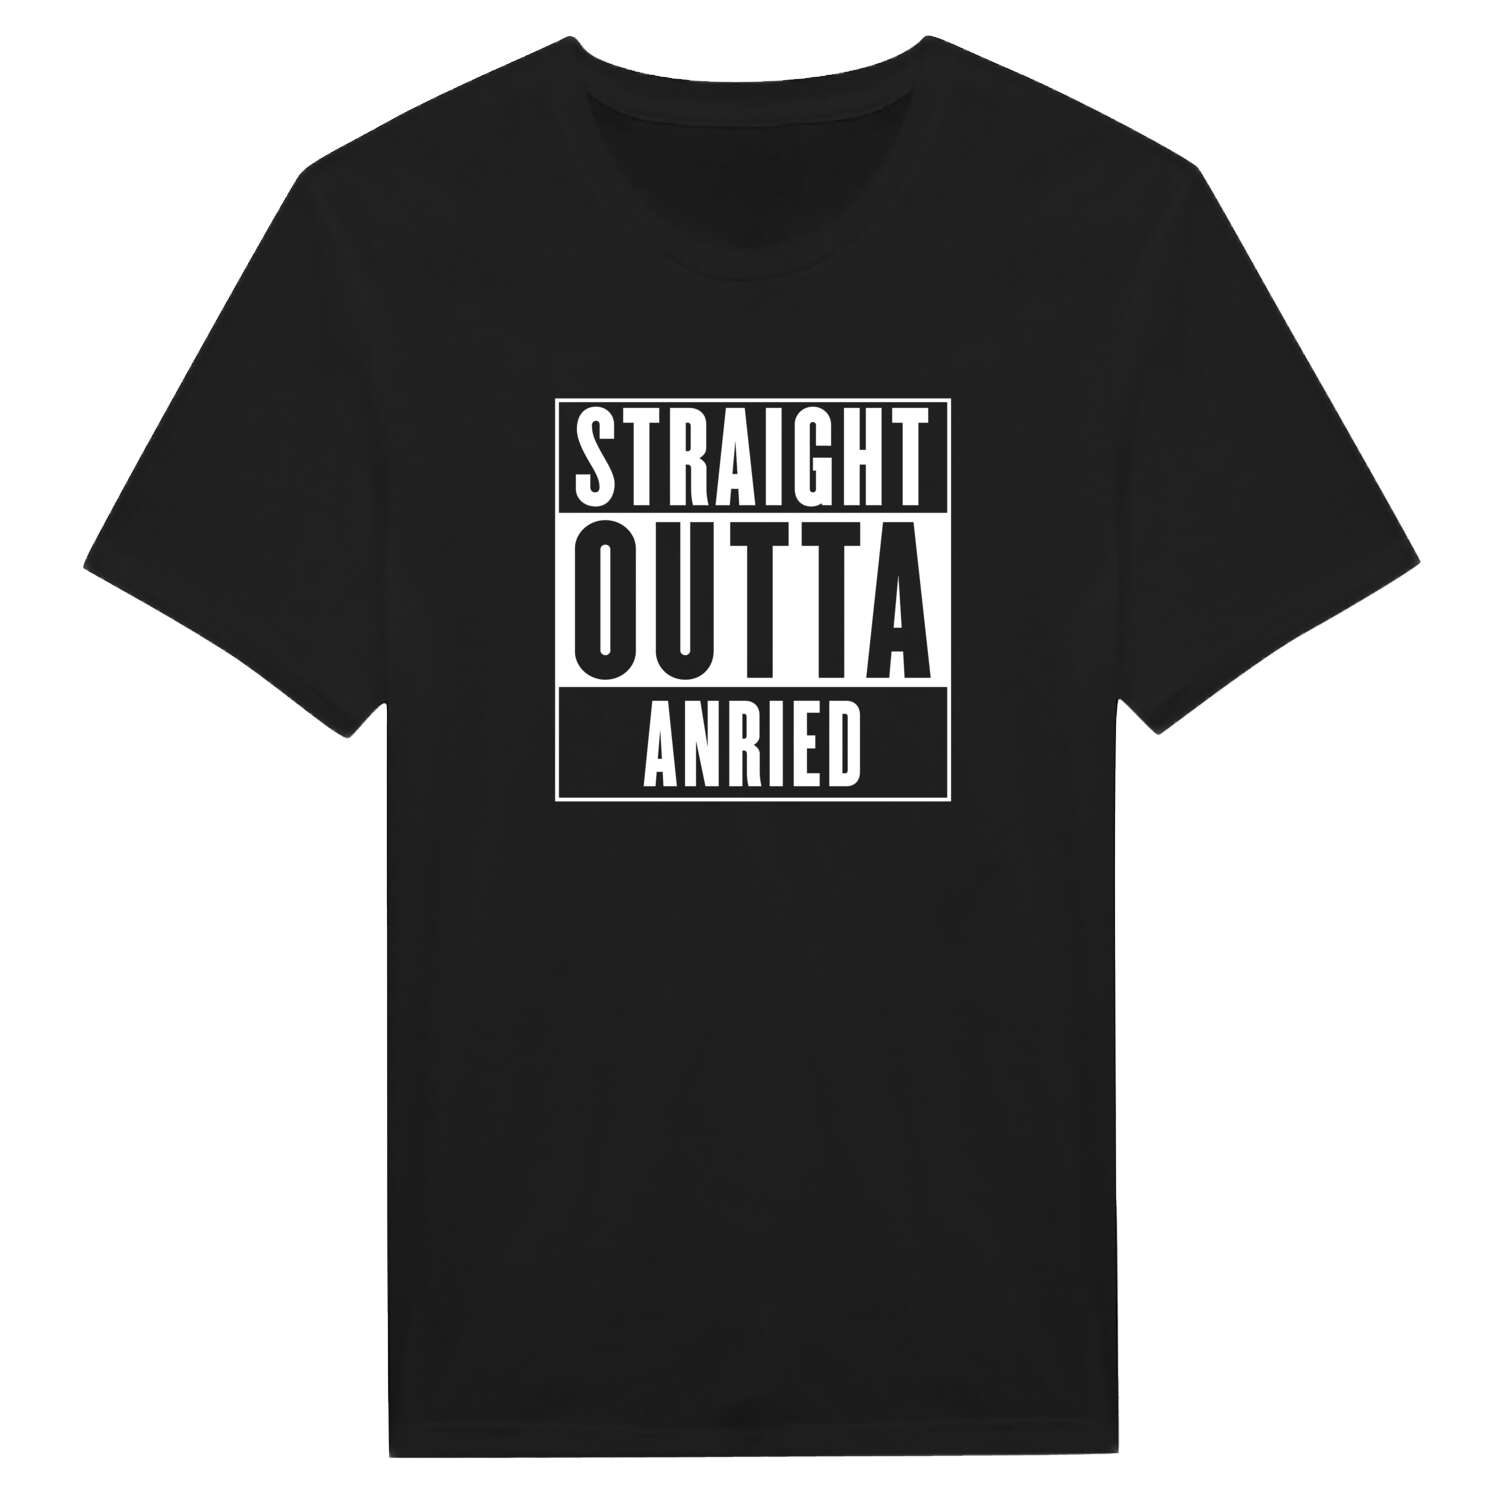 Anried T-Shirt »Straight Outta«